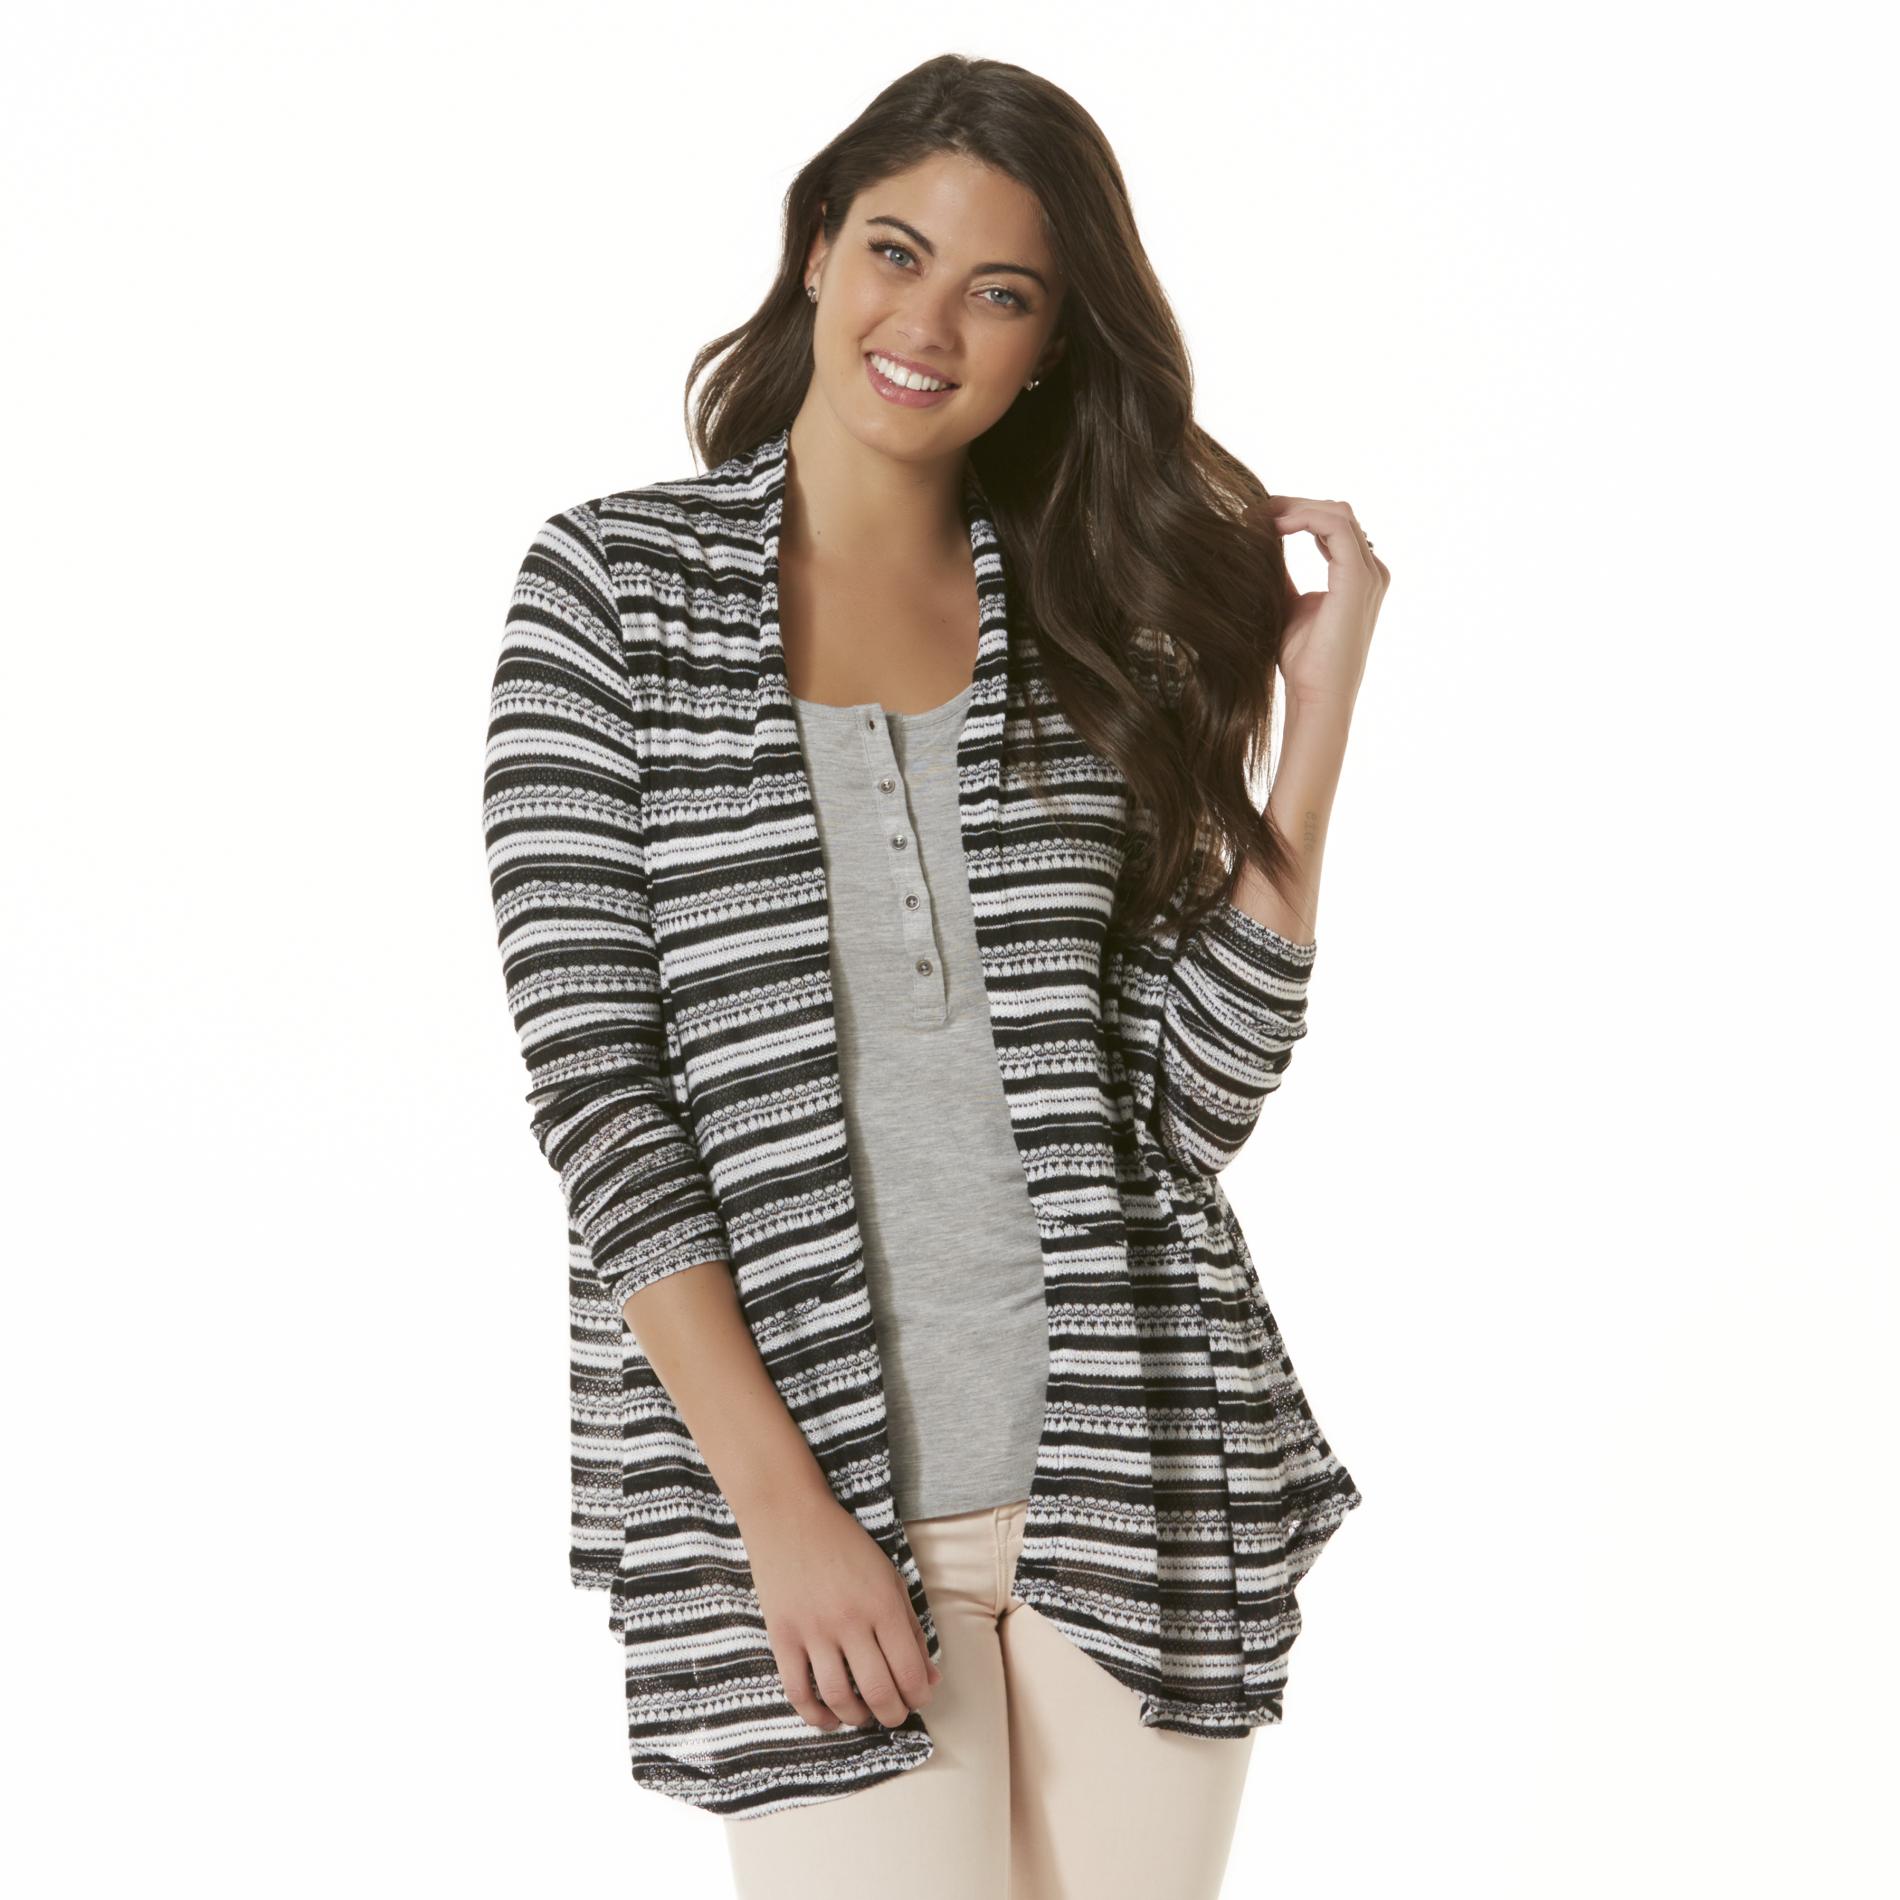 Simply Styled Women's Waterfall Cardigan - Striped